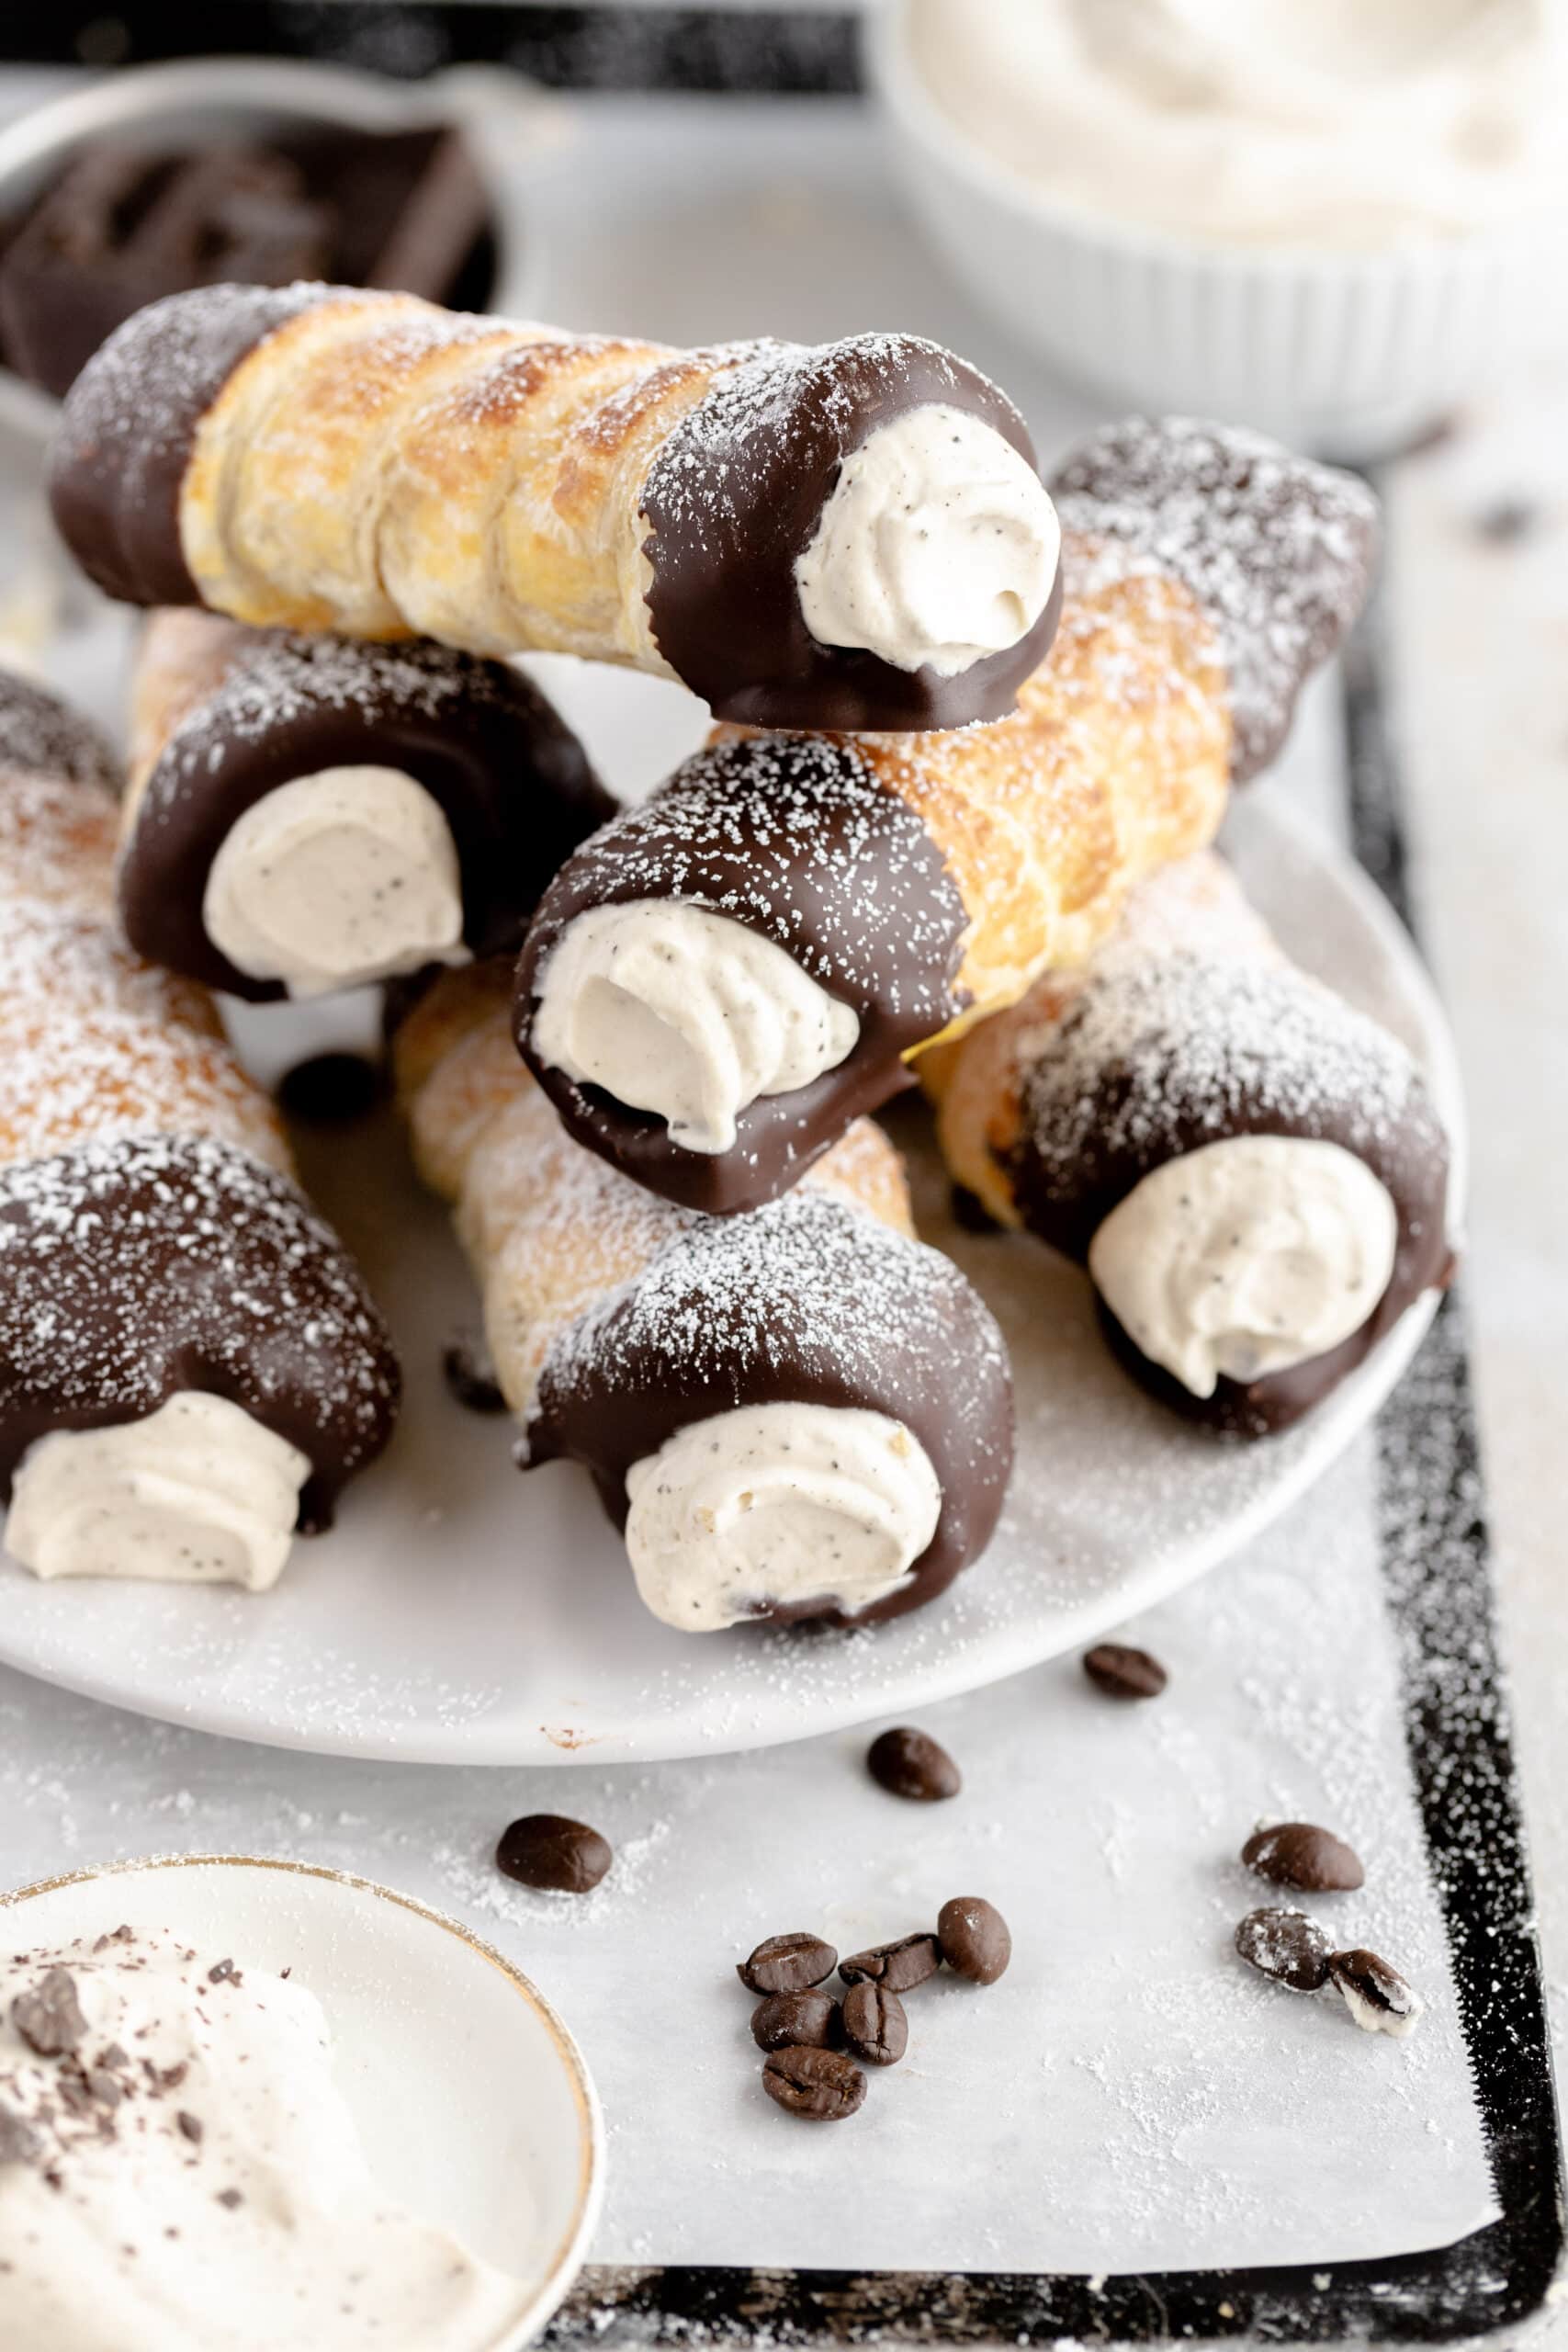 Puff pastry rolls filled with coffee whipped cream and dipped in chocolate stacked on a white plate and dusted with powdered sugar.